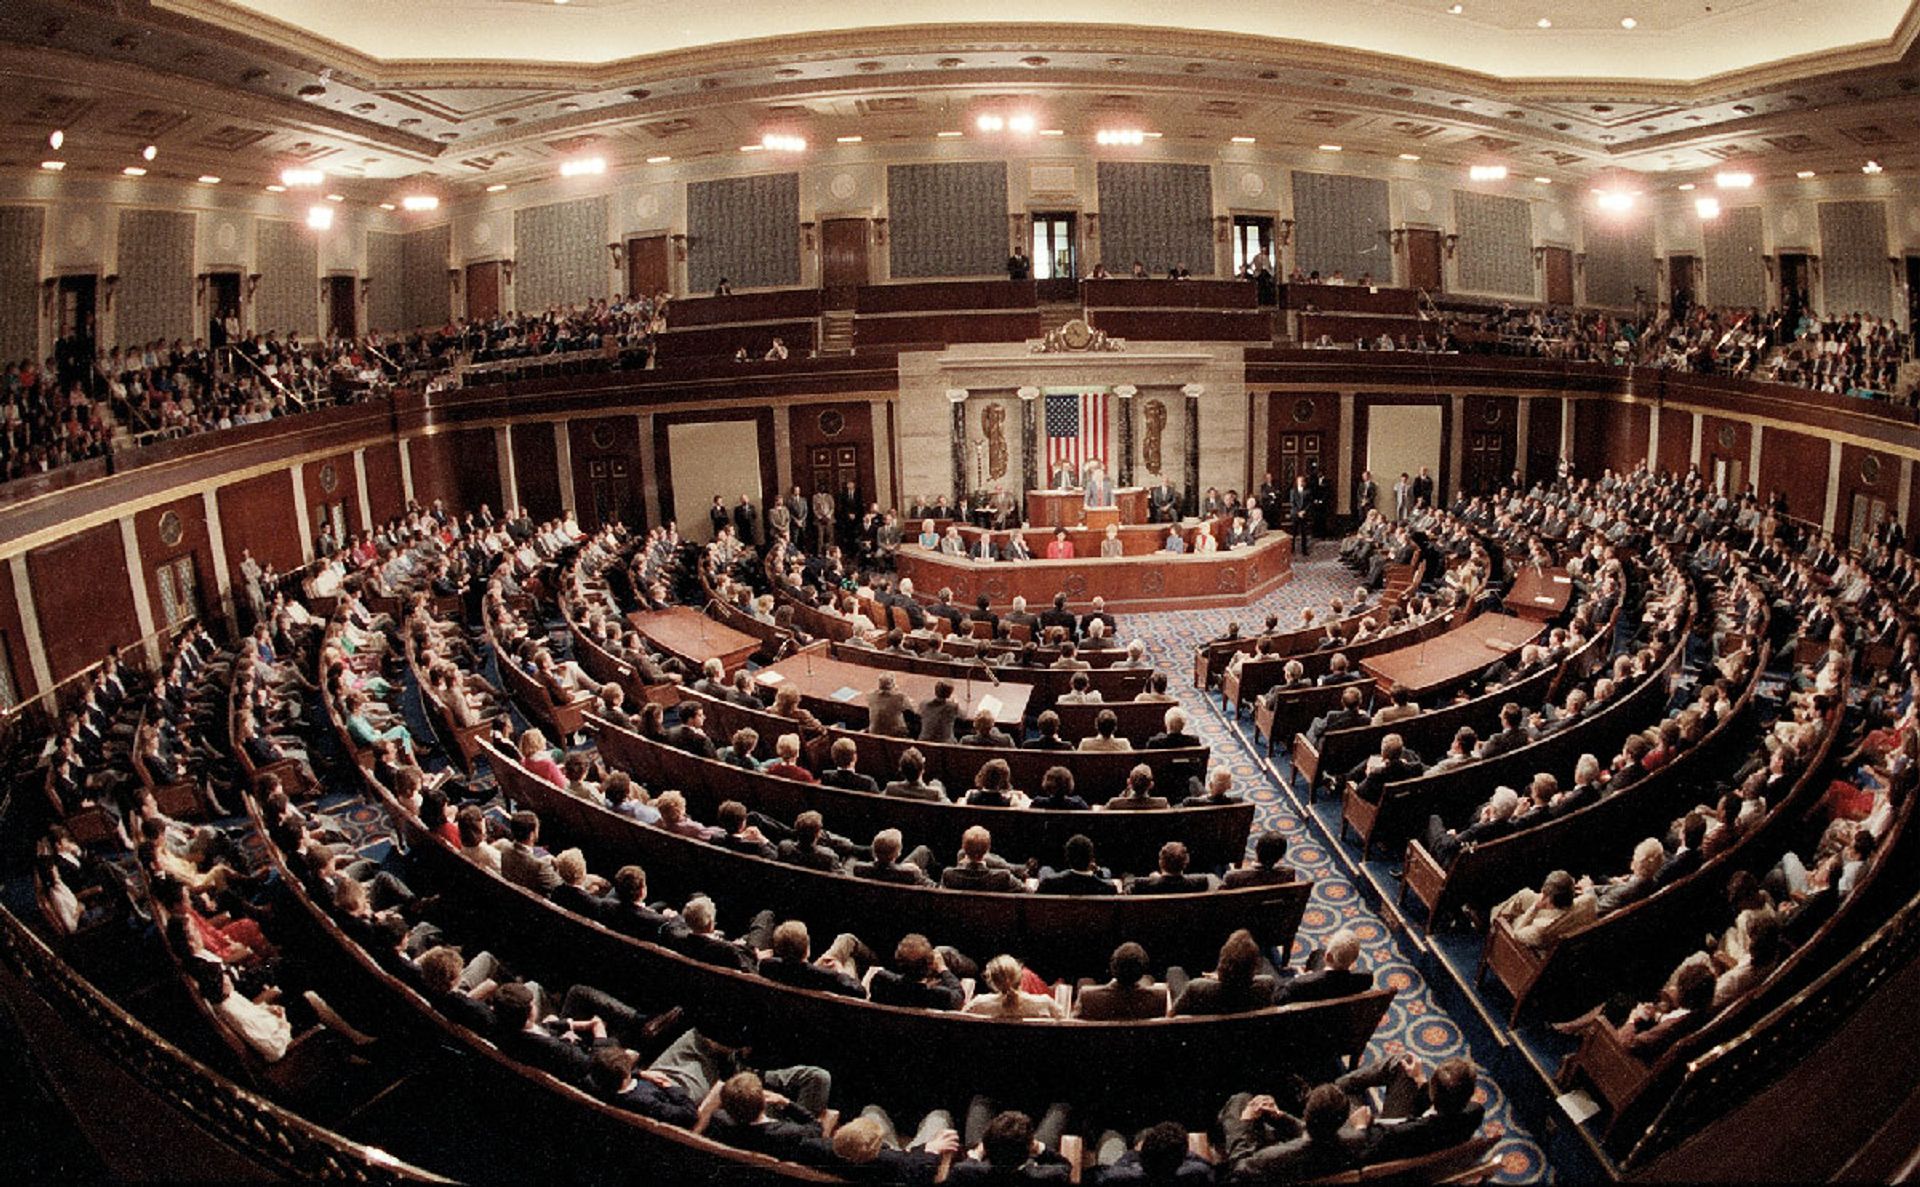 Mr Lee had the rare honour of addressing a joint session of the United States Senate and House of Representatives on Oct 9, 1985. US Vice-President George H.W. Bush, who was president of the Senate, and Speaker of the House of Representatives Tip O’Neill were present and gave Mr Lee a standing ovation after his speech. Photo: Wun Pak Kai/Lianhe Zaobao